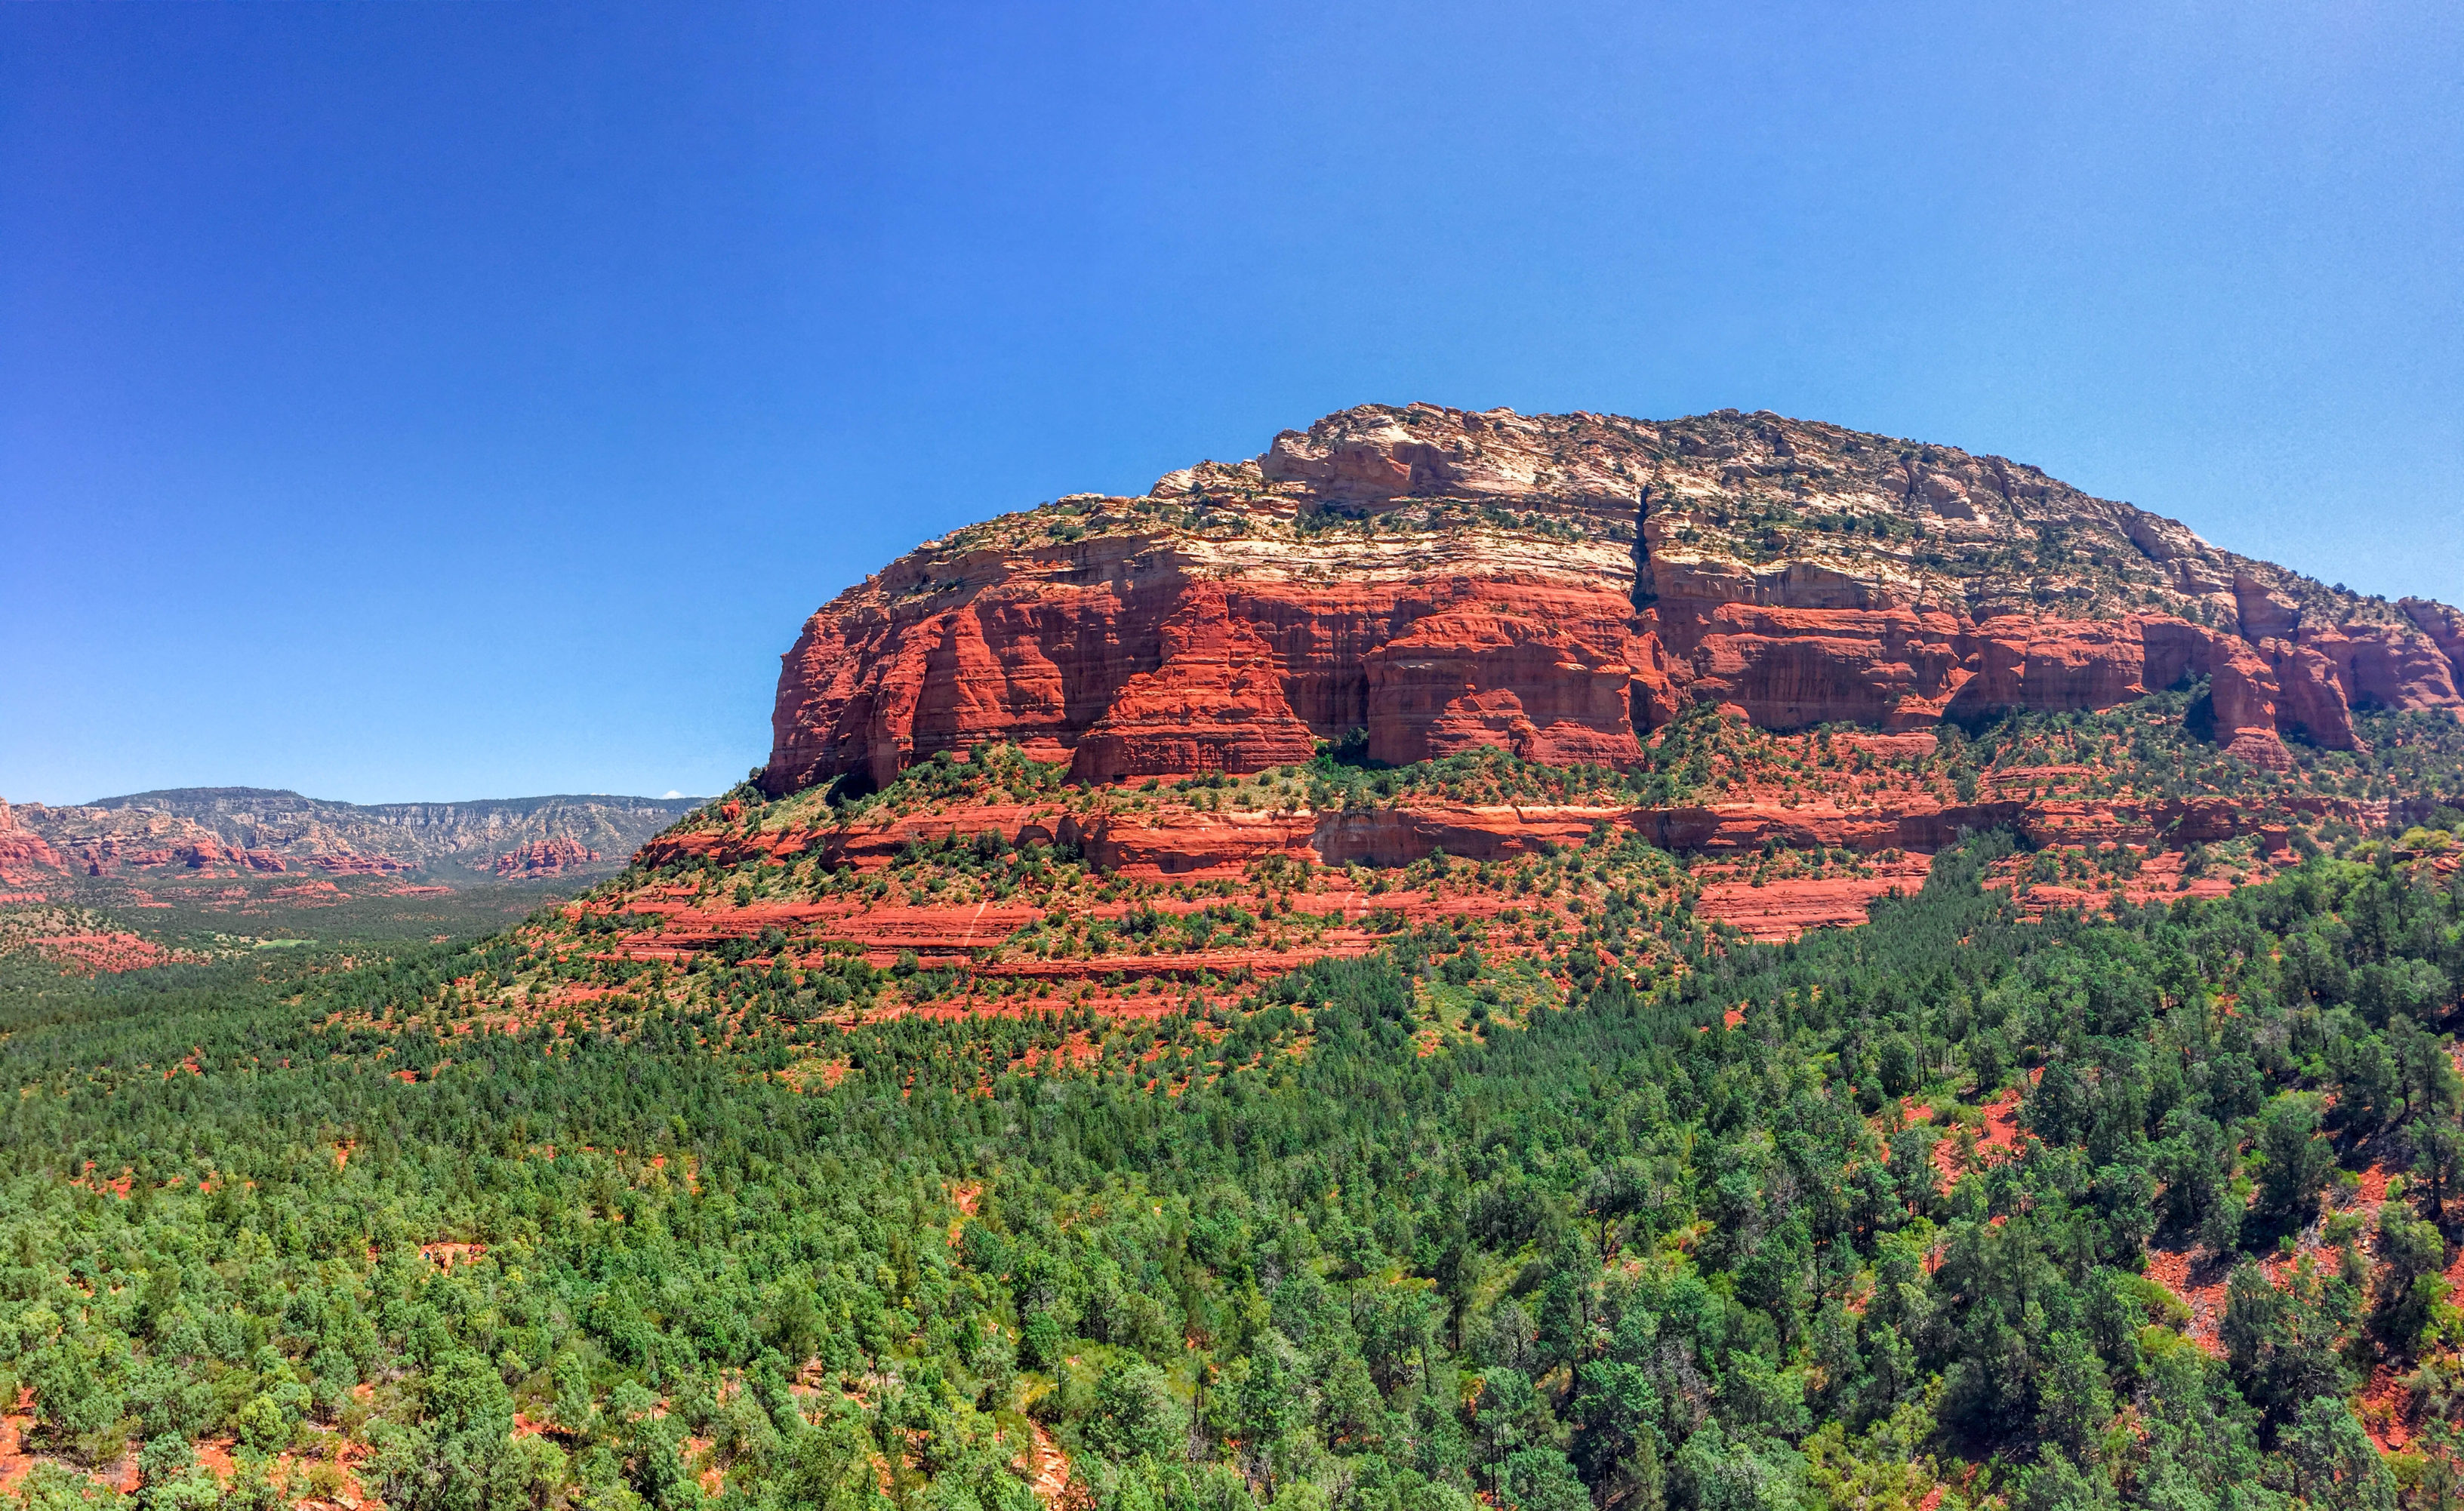 AZ- There Is So Much More Than Just A Desert, and Today: Sedona!